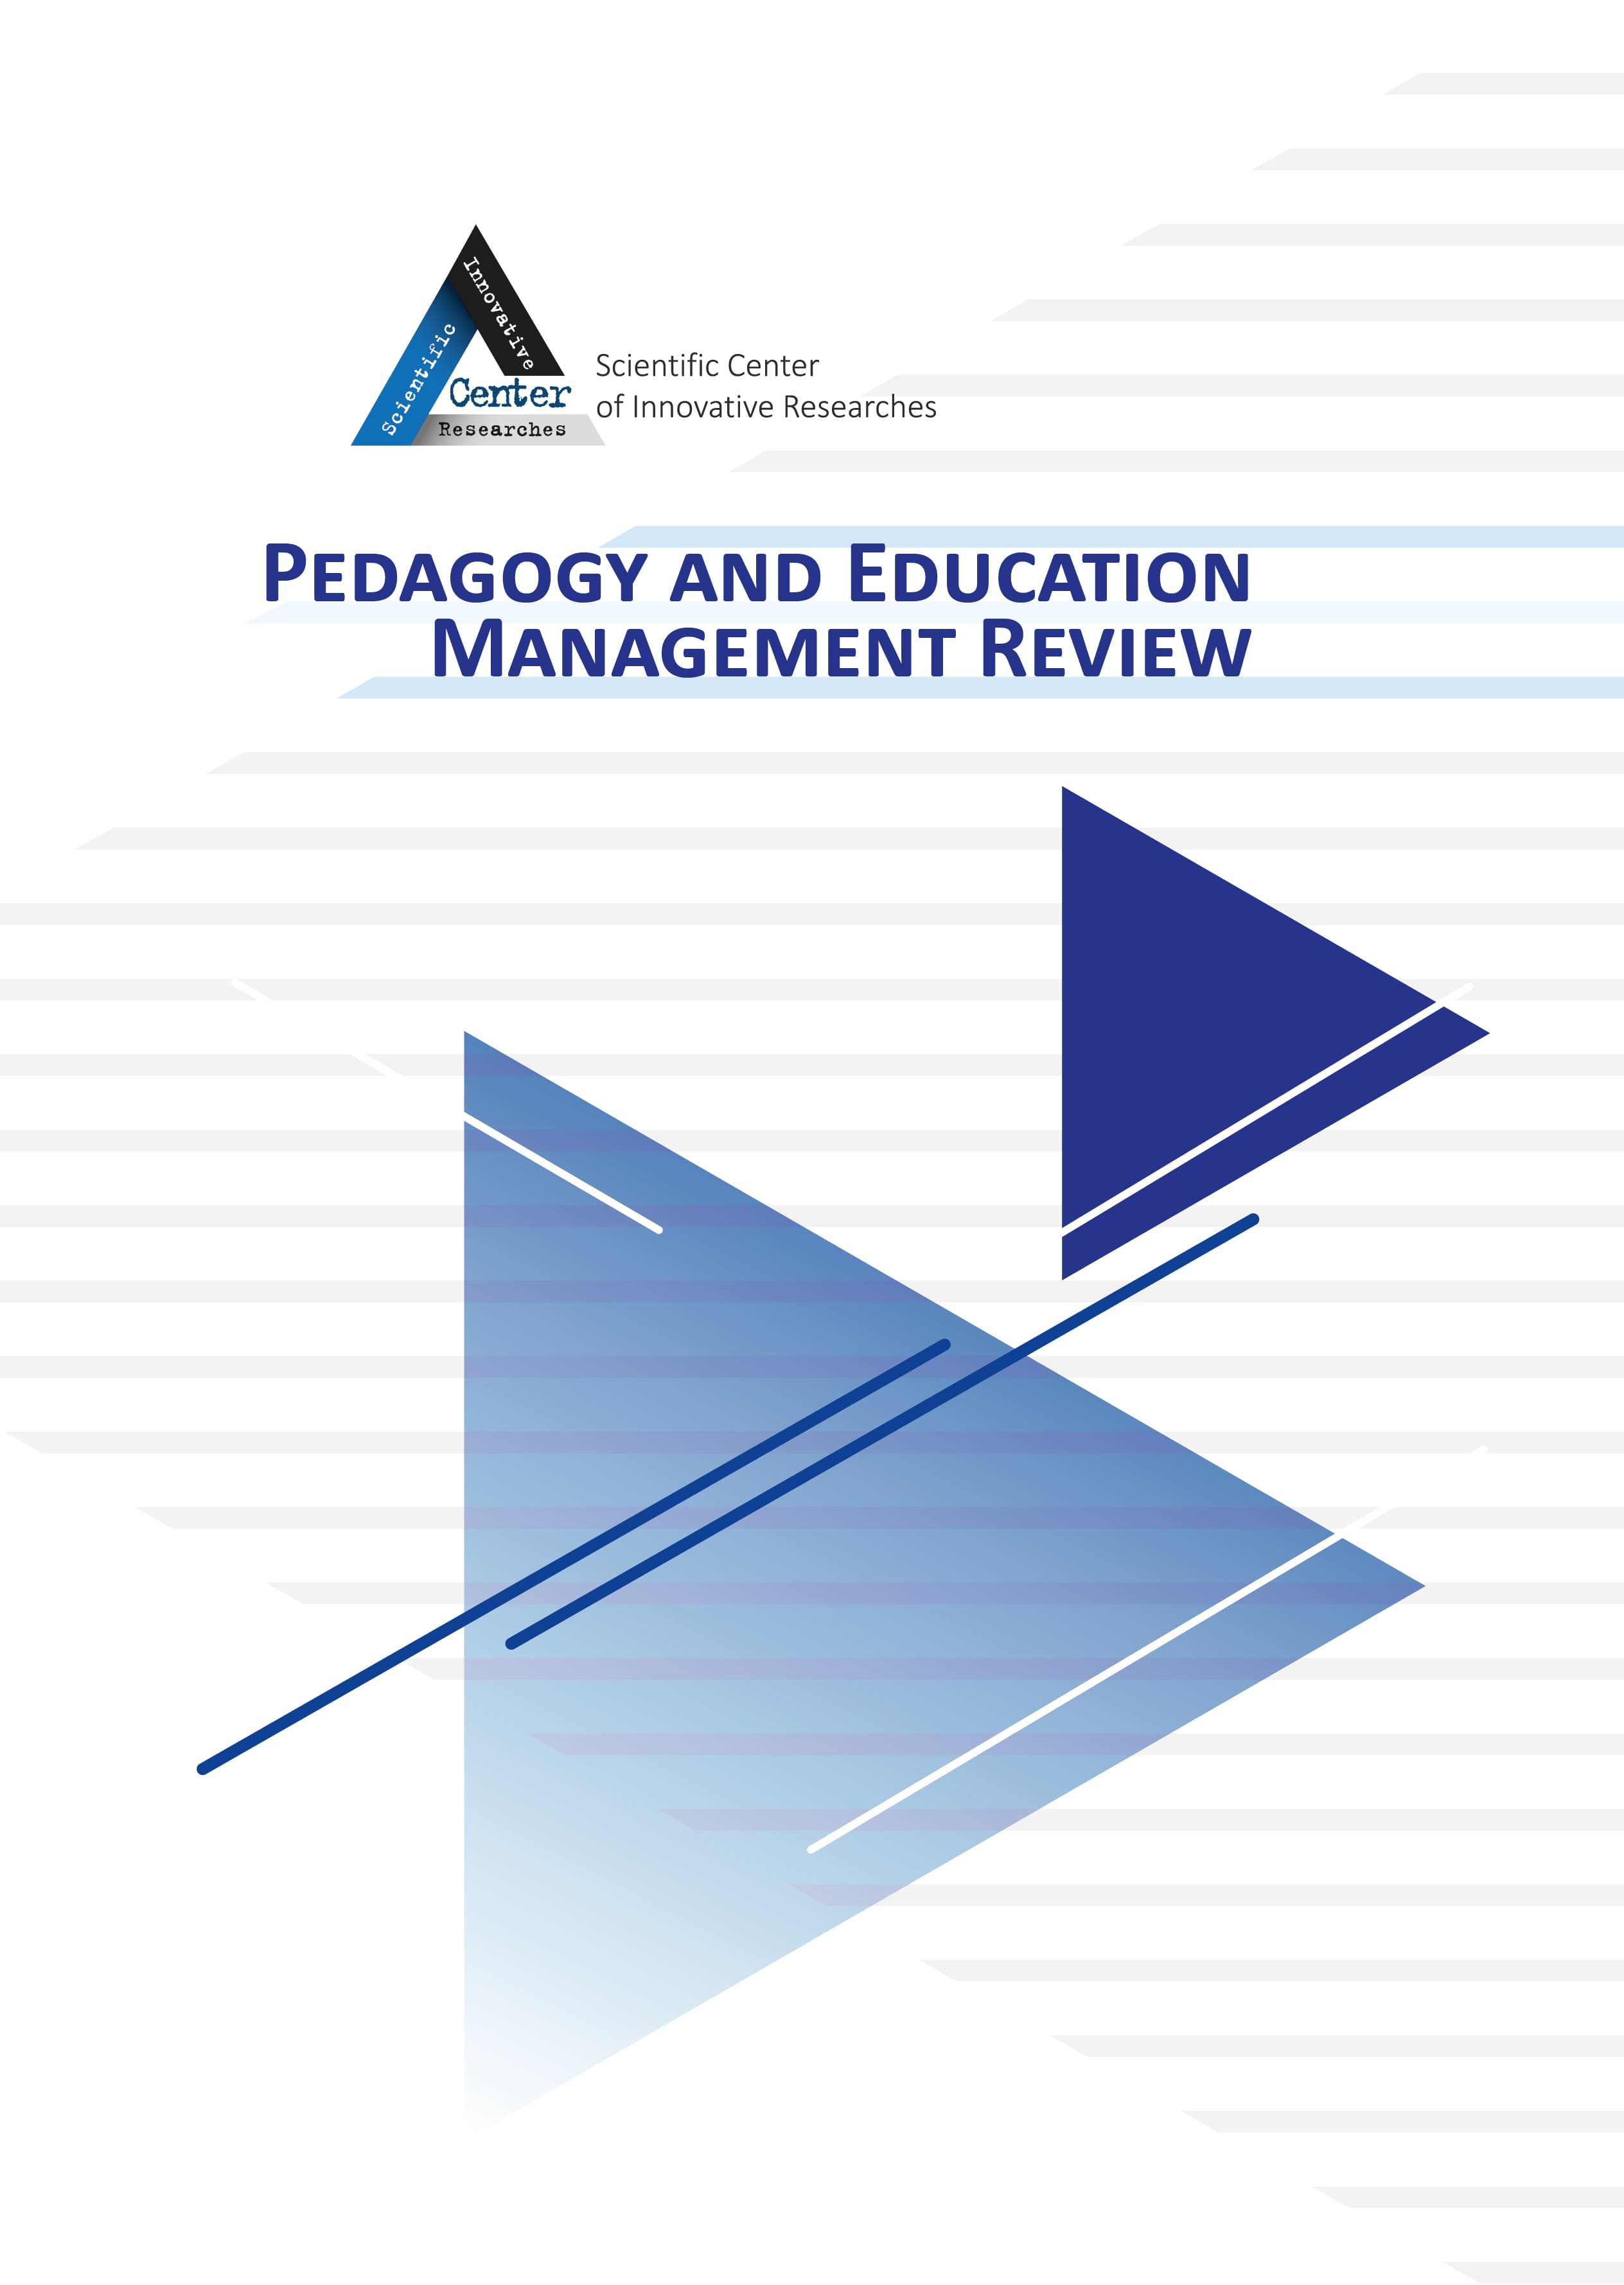 					View No. 1 (2021): PEDAGOGY AND EDUCATION MANAGEMENT REVIEW
				